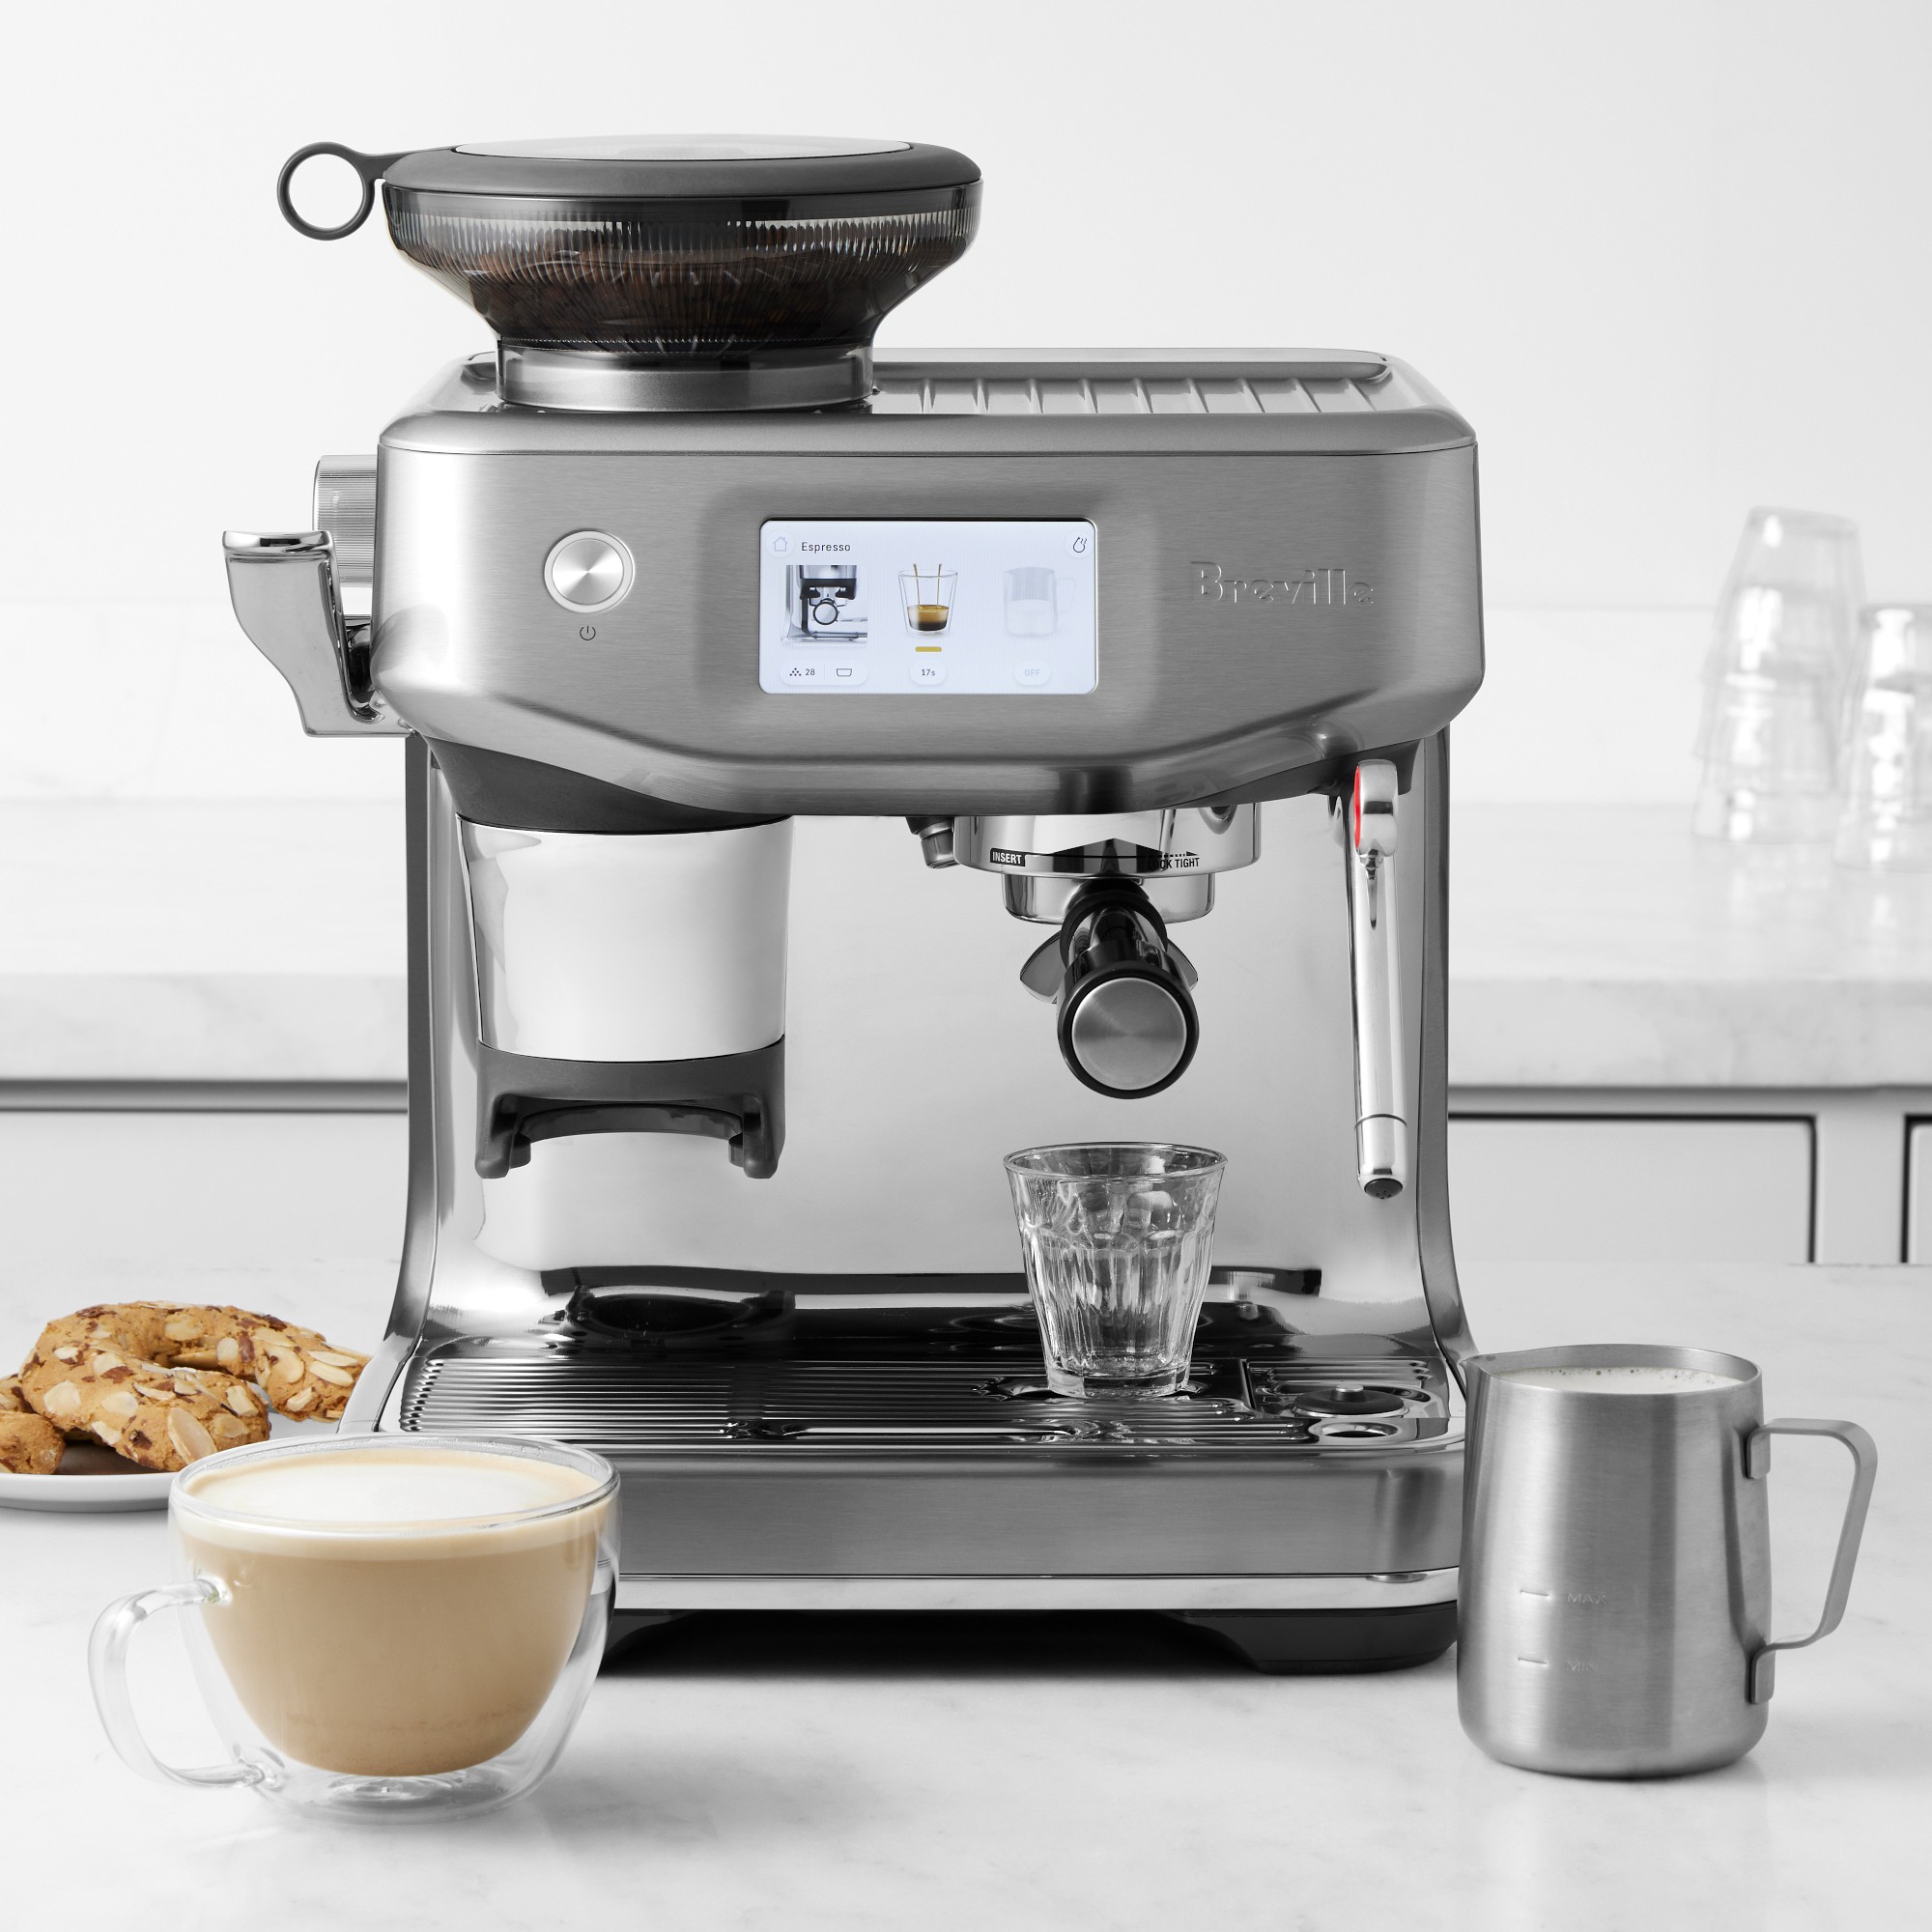 Breville's Touch Impress Espresso Machine makes cafe quality